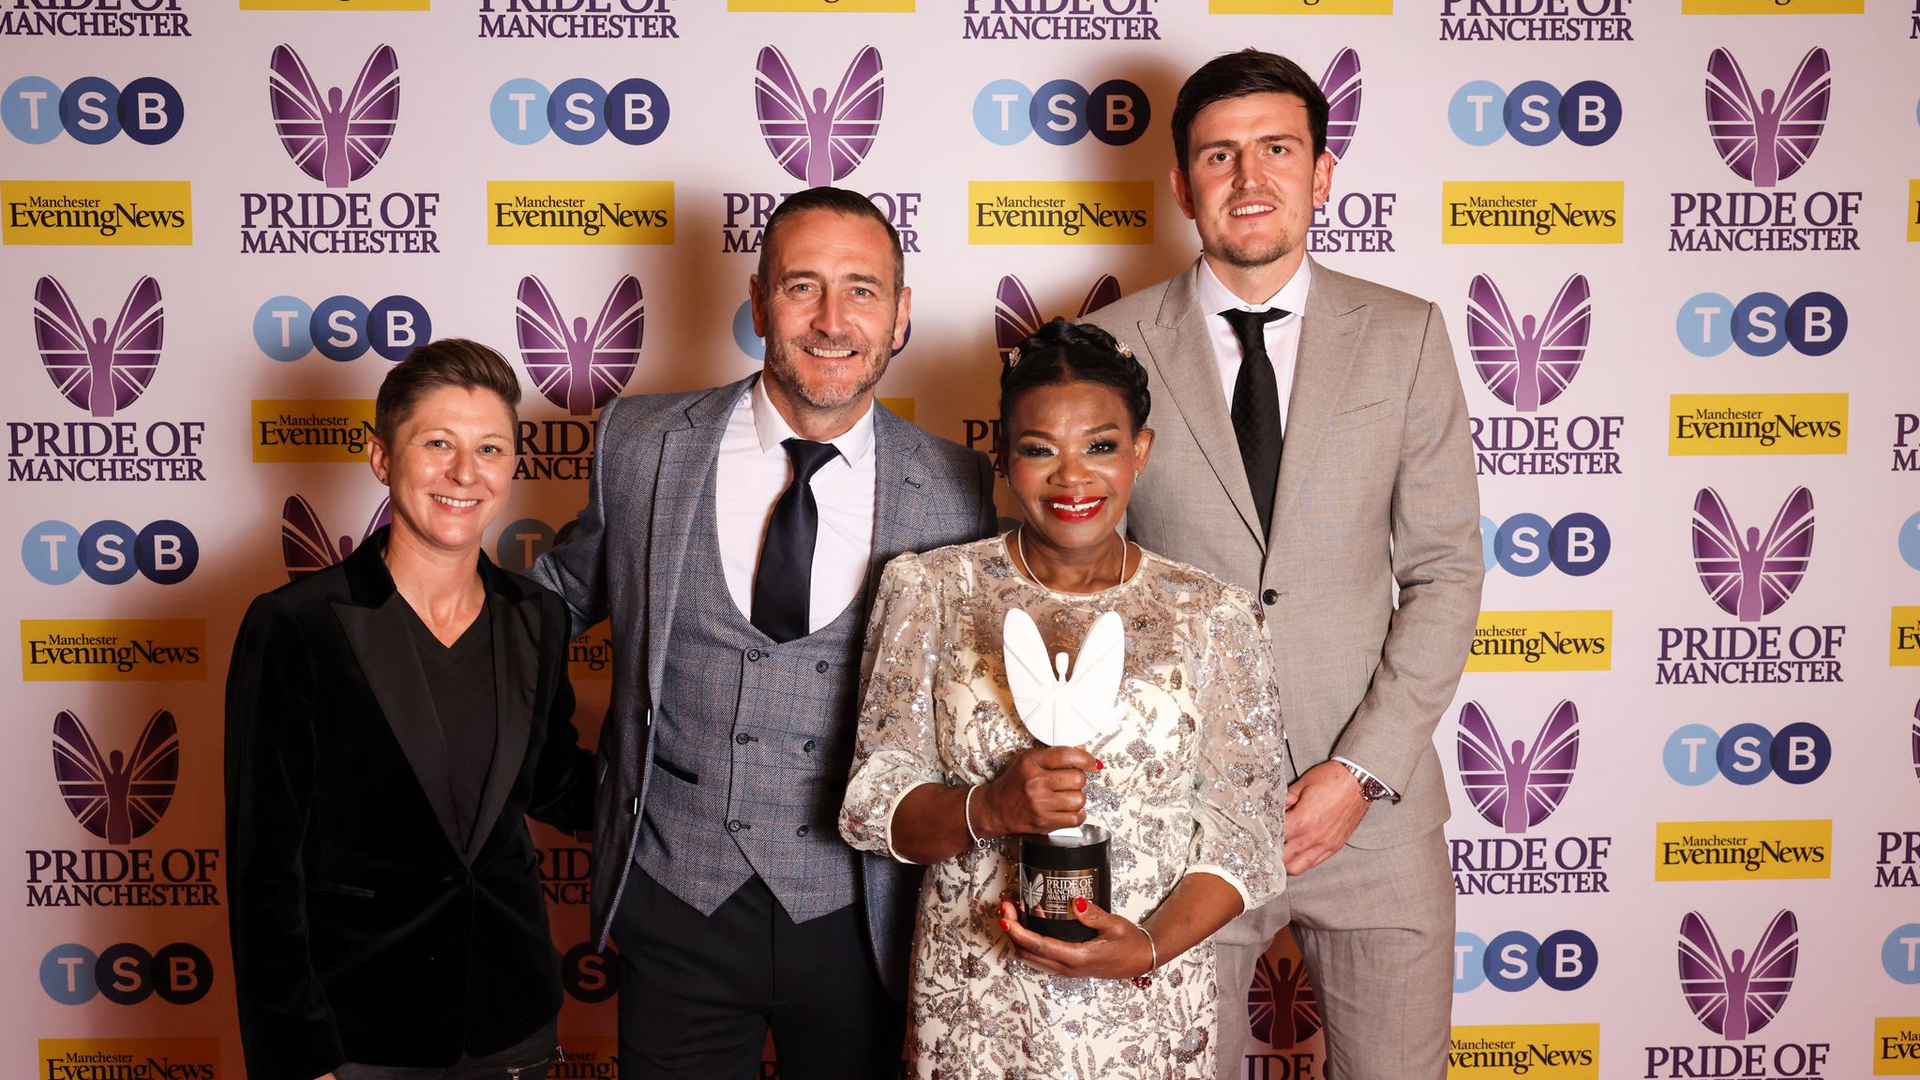 Harry Maguire presents award at Pride of Manchester event